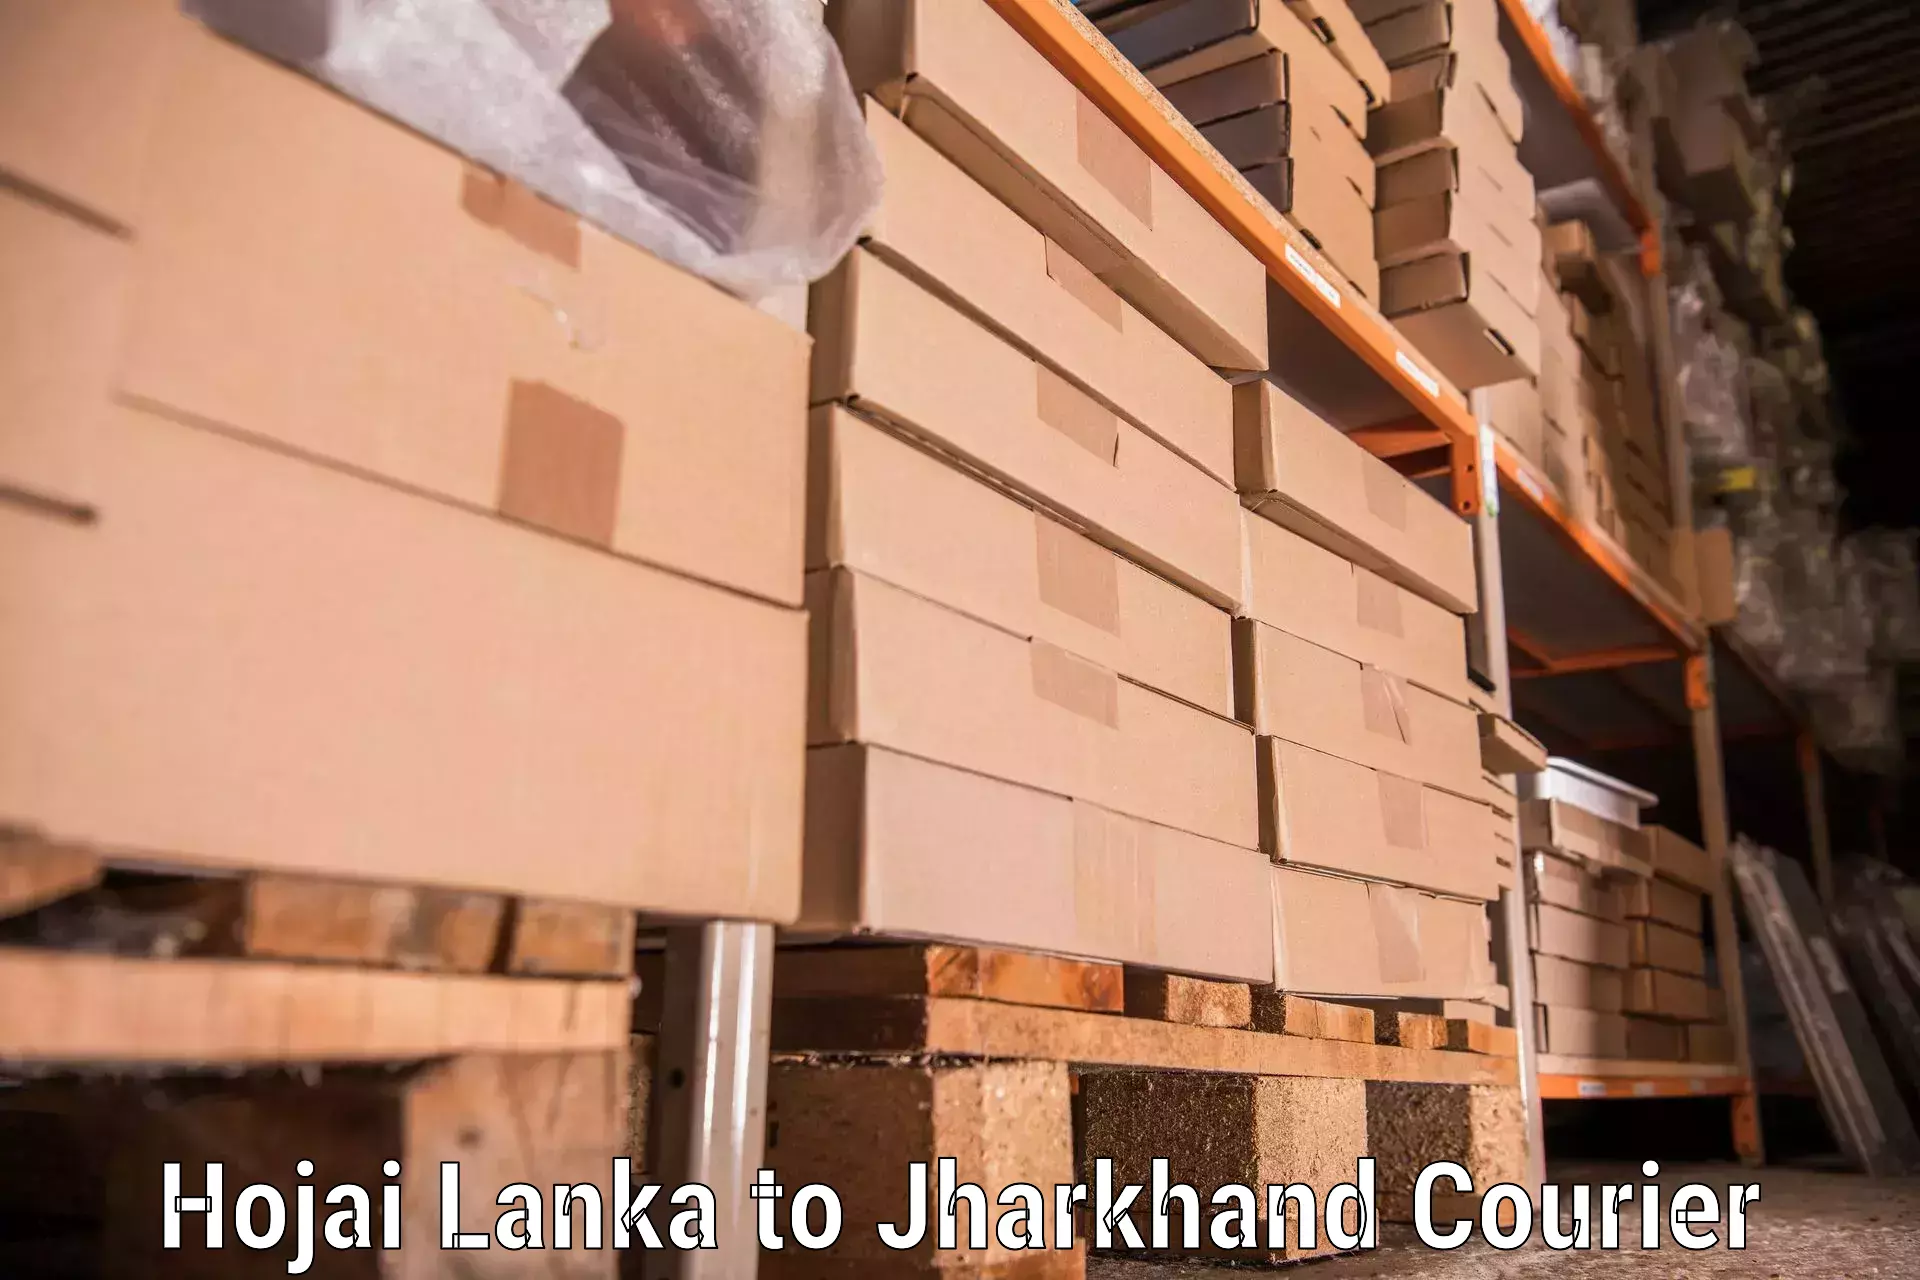 Professional packing and transport Hojai Lanka to Gomoh